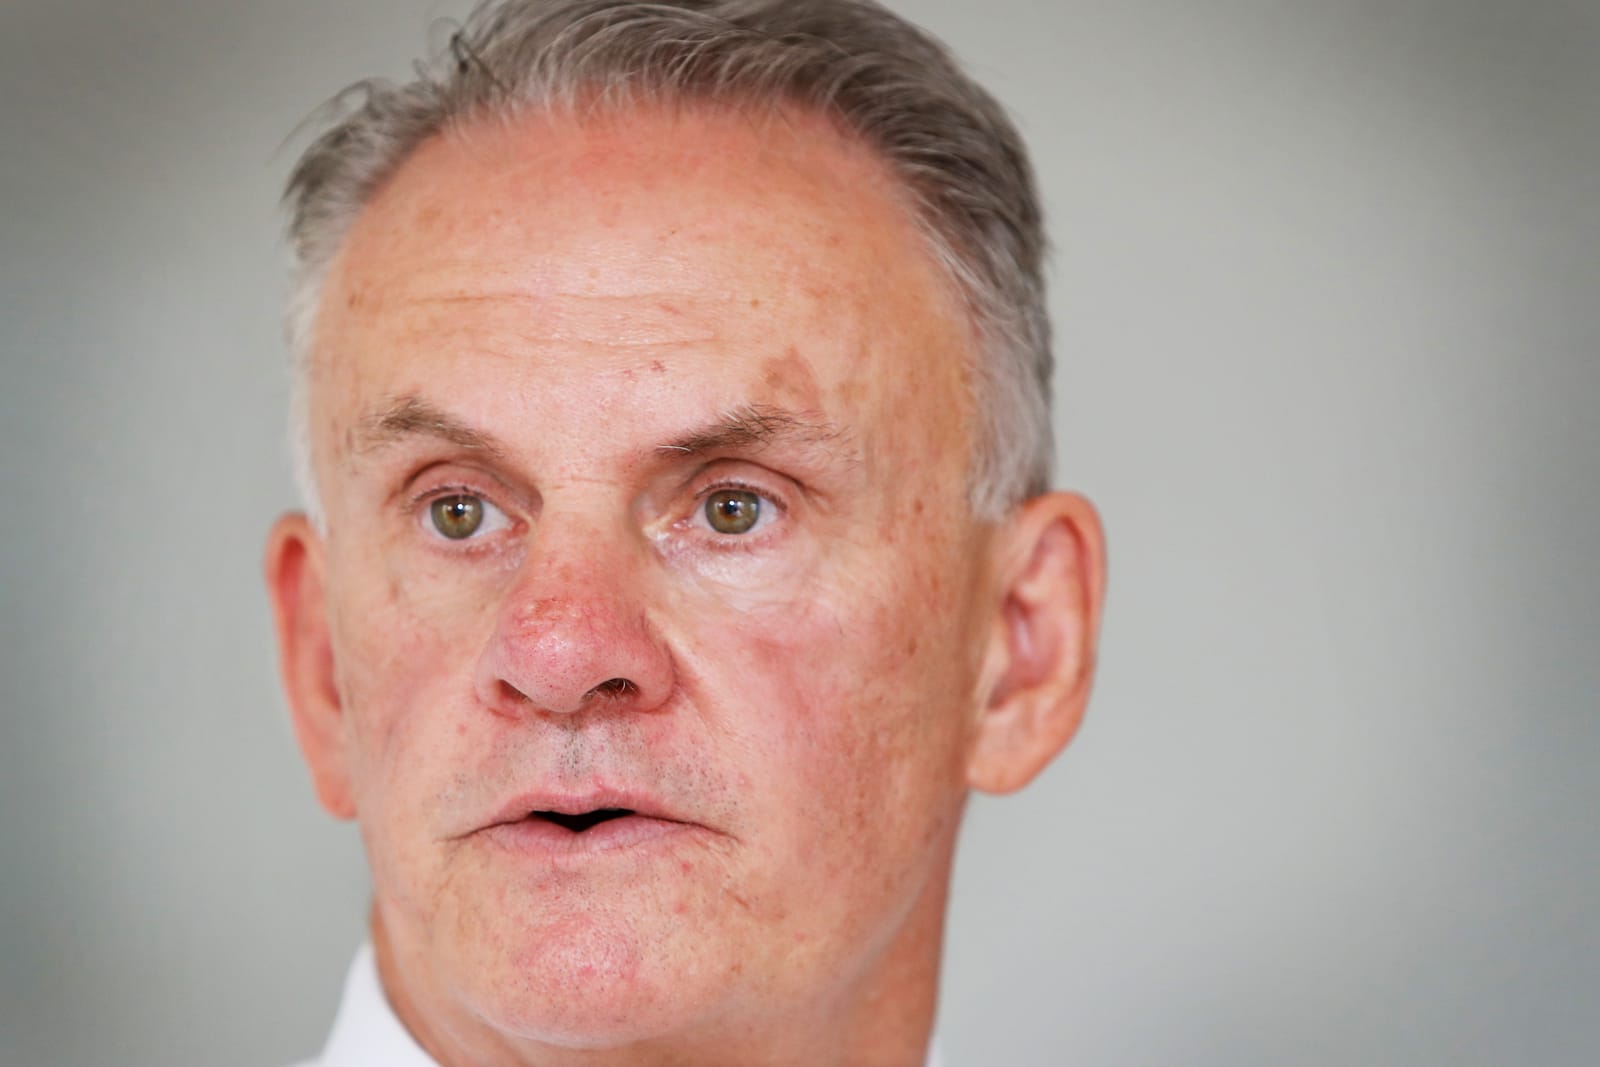 ‘All tip, no iceberg‘ – Latham launches extraordinary parliamentary attack on 'part-time' Peter V’landys